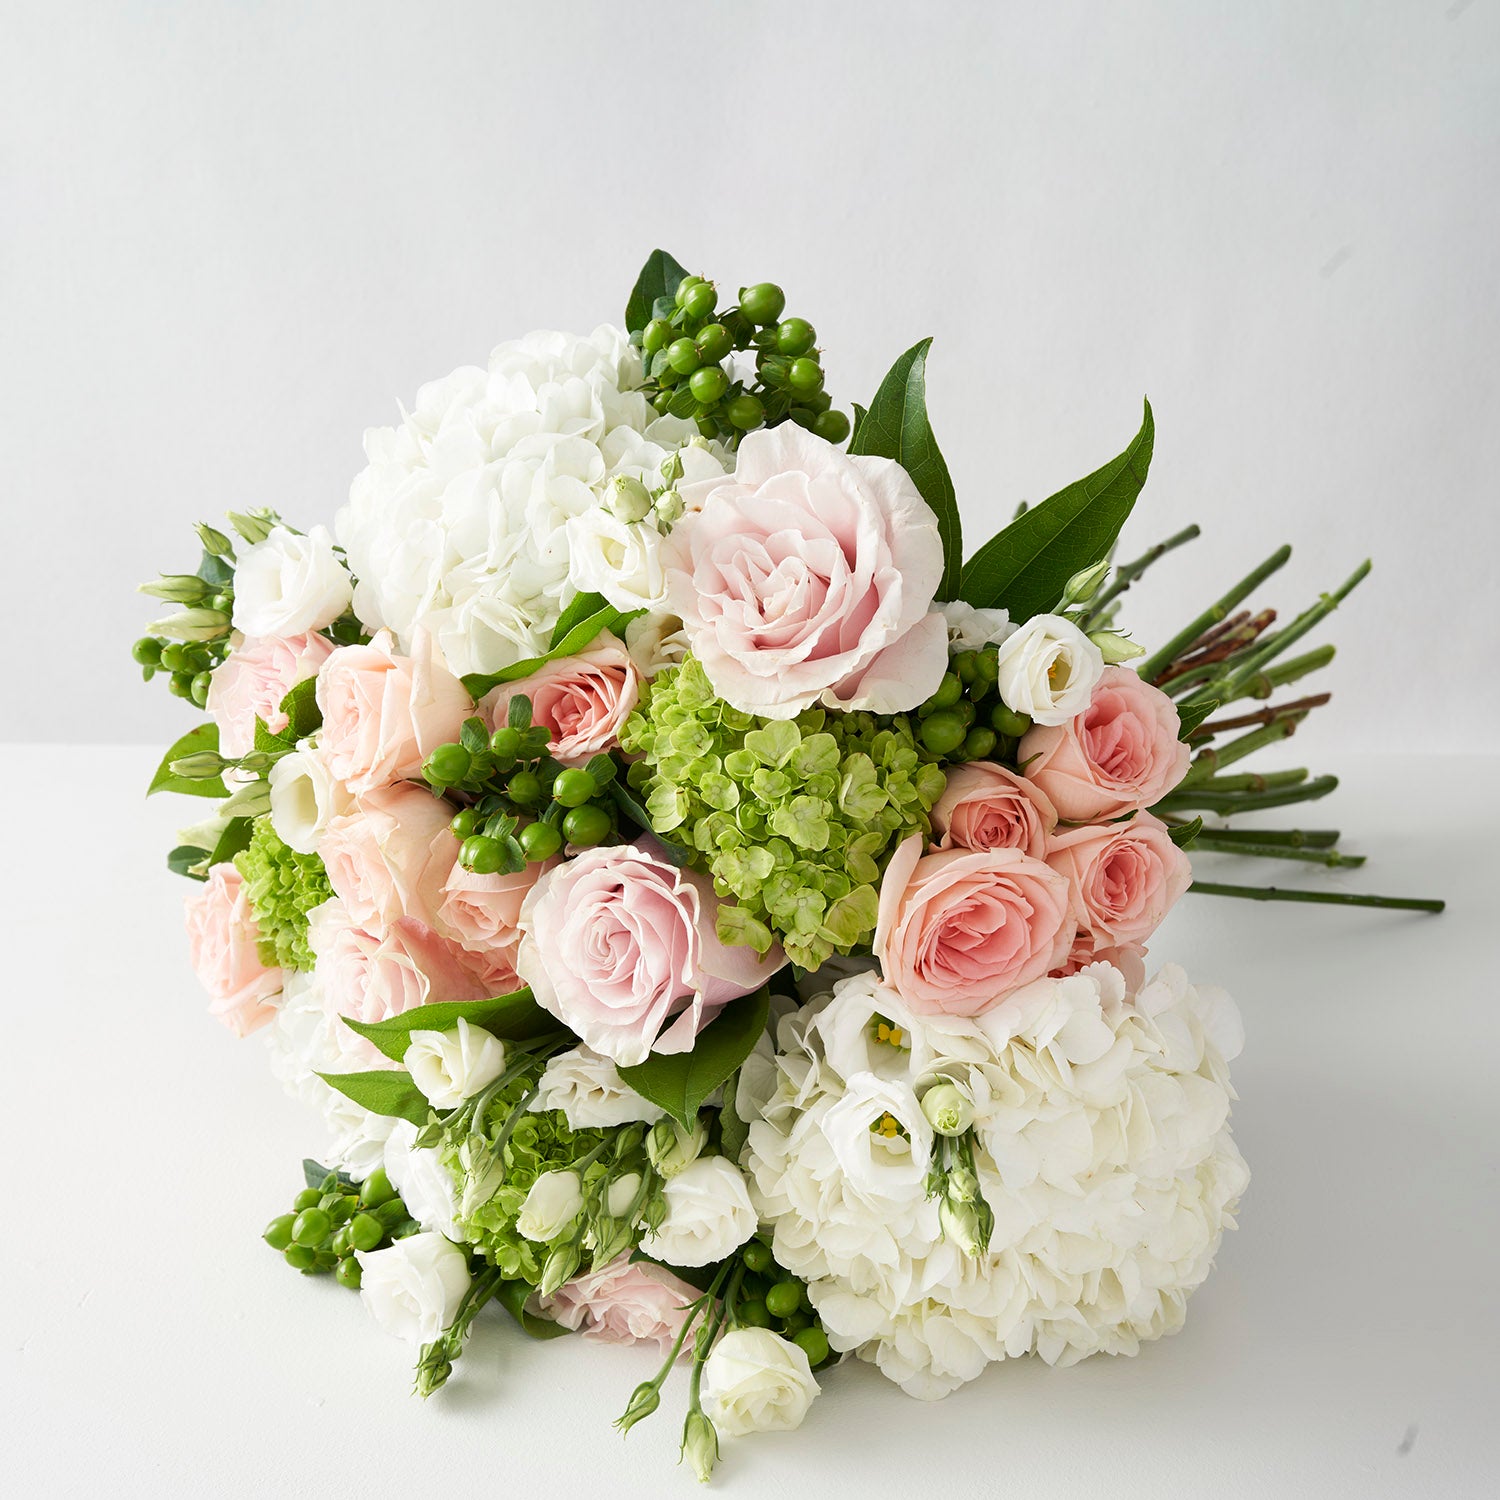 Round tradional style handtied bouquet in pinks whites and greens, including roses, hydangea and lisianthus on white background.